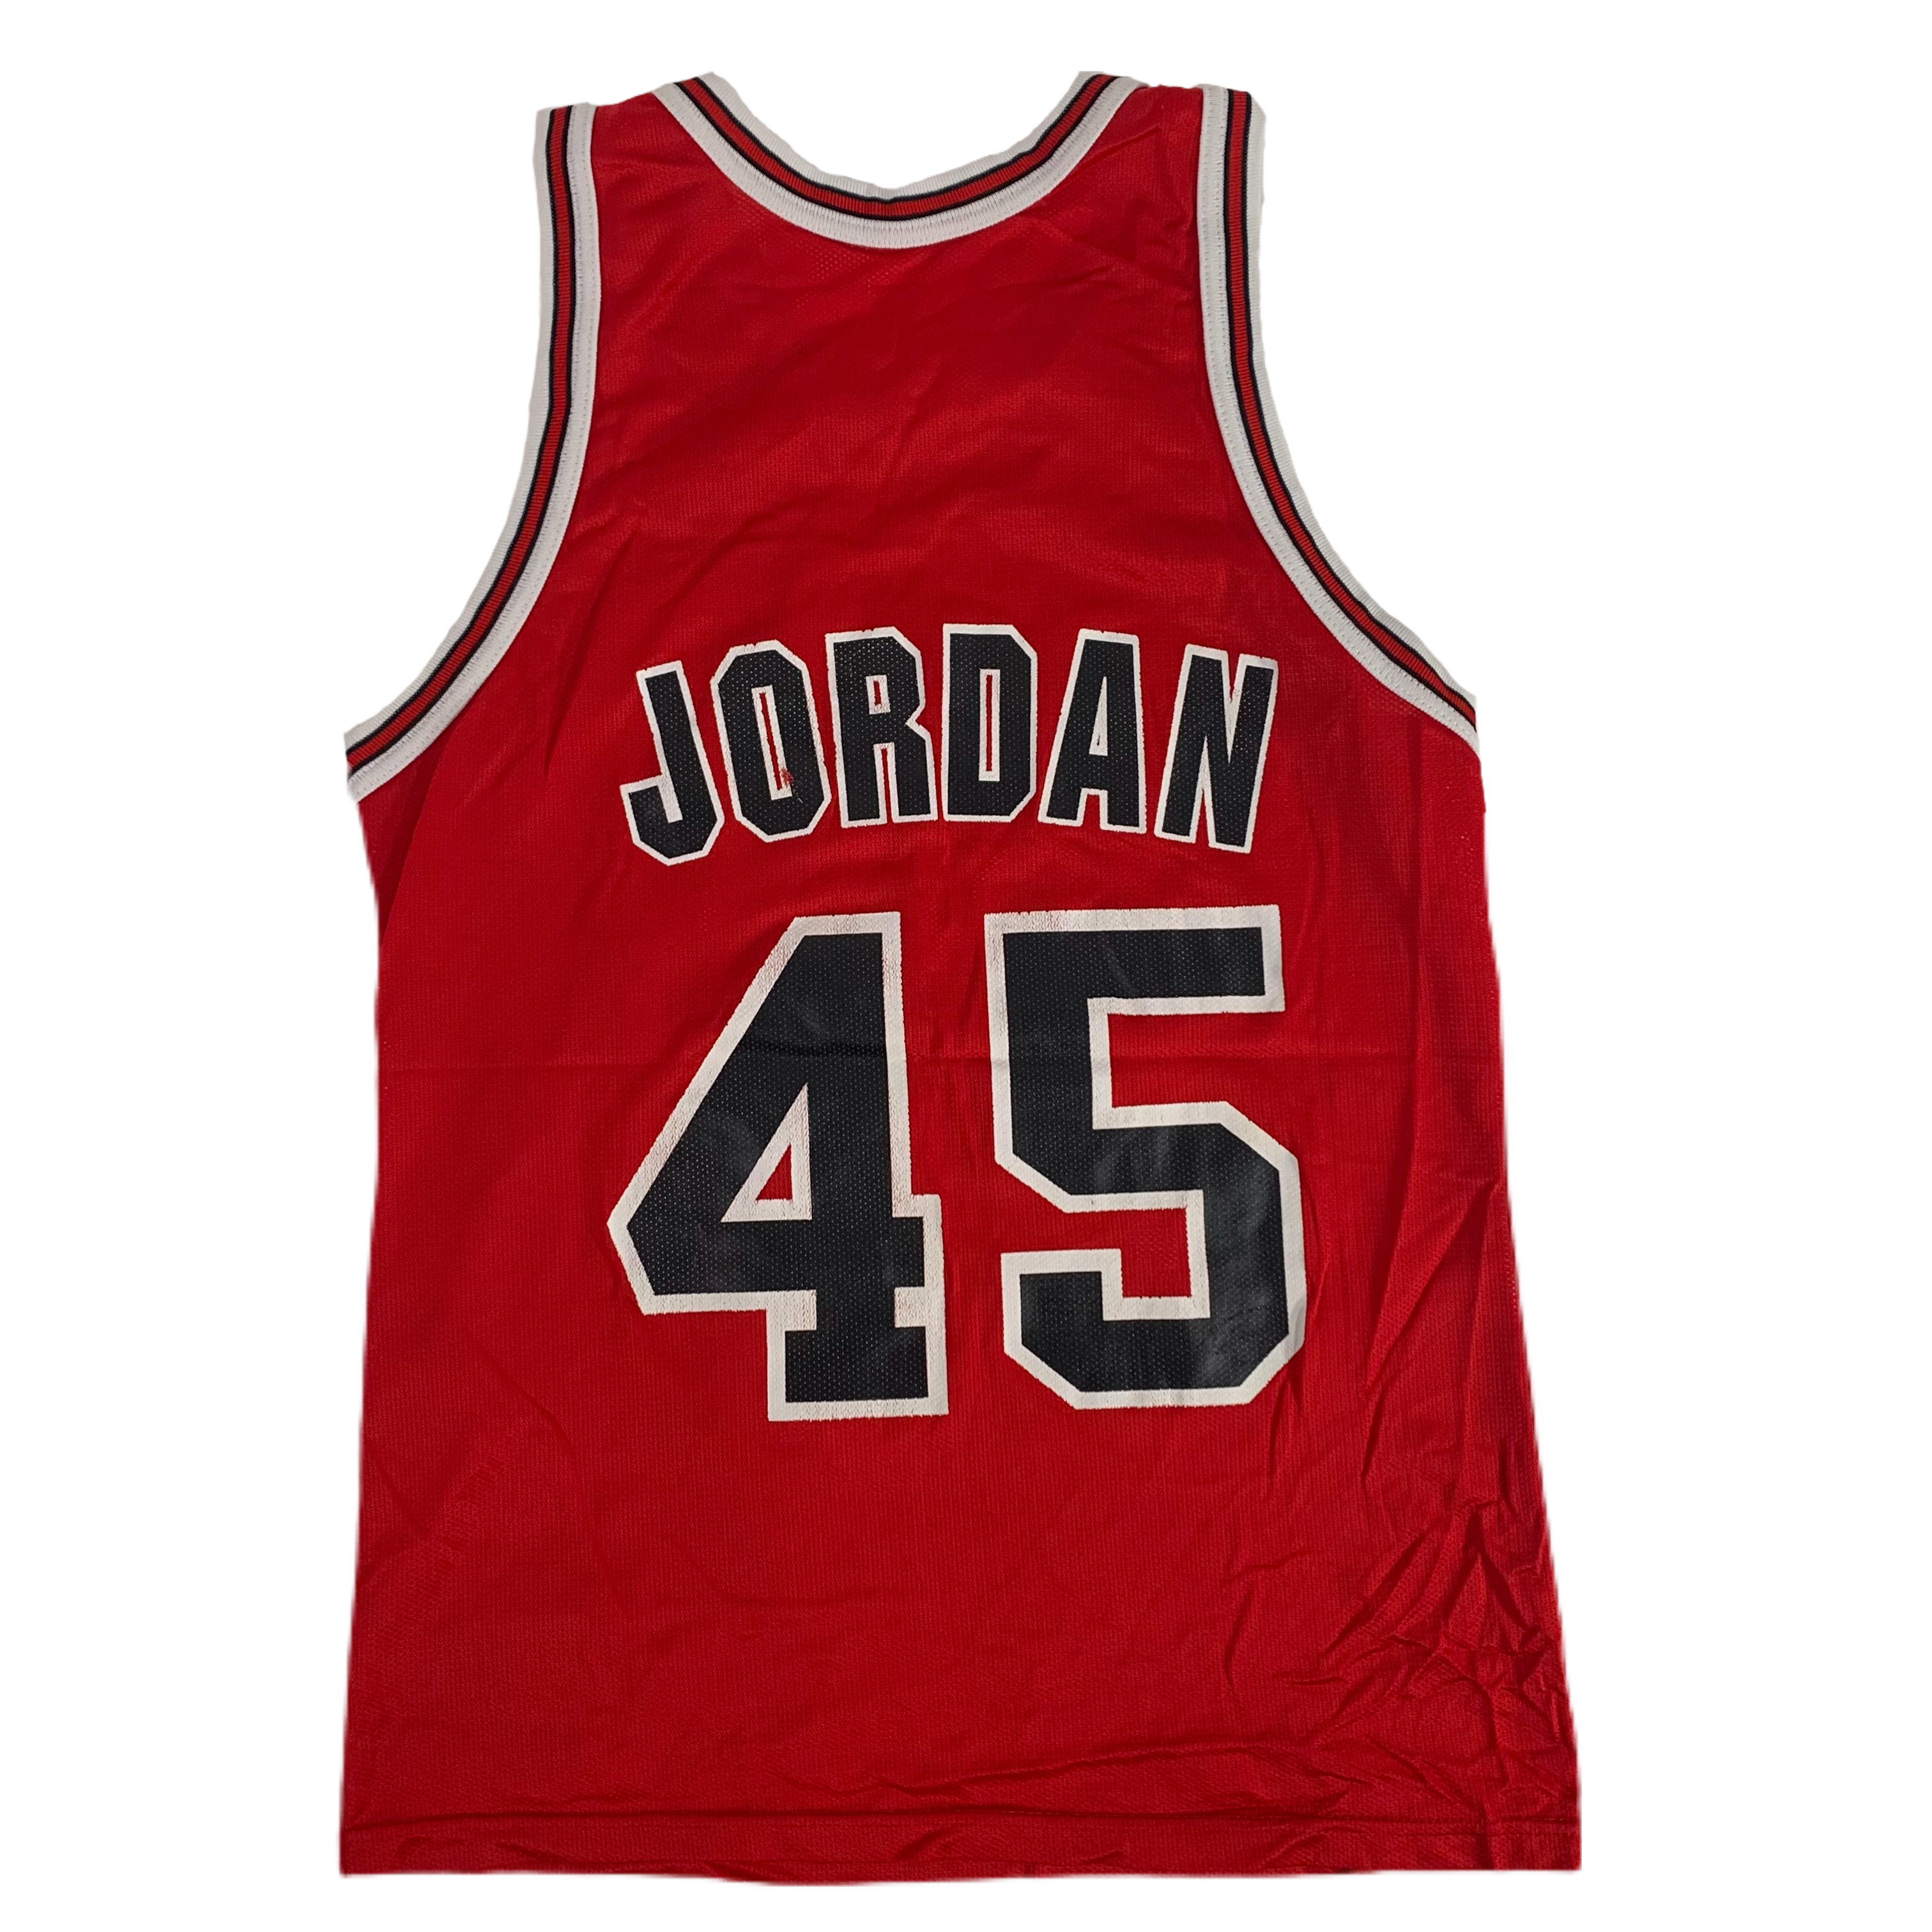 Michael Jordan's number 45 jersey to go on sale